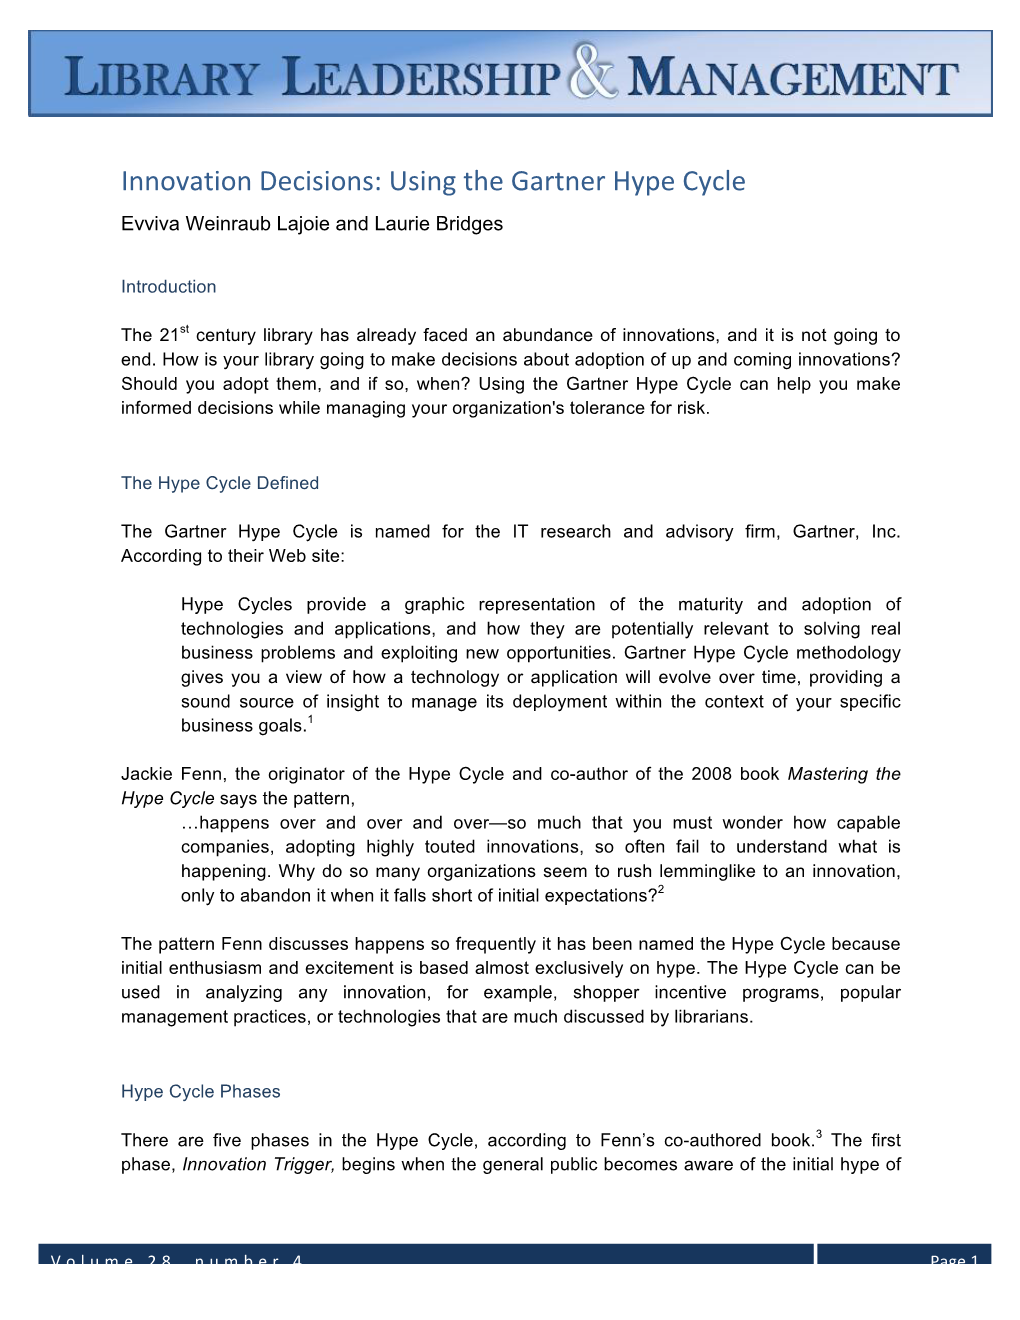 Innovation Decisions: Using the Gartner Hype Cycle Evviva Weinraub Lajoie and Laurie Bridges